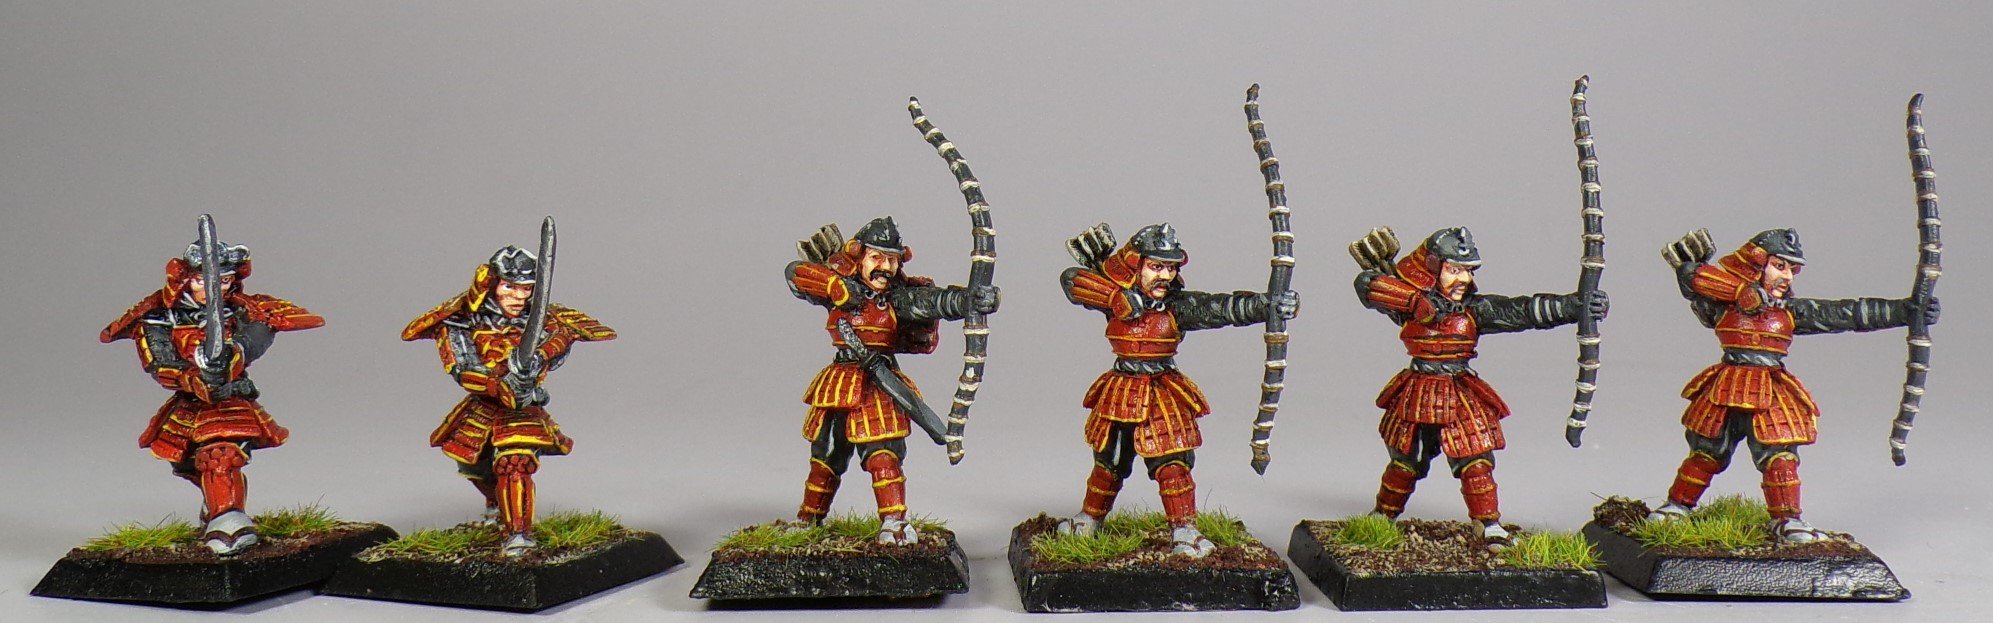 L5R Legend of the Five Rings Miniature Painting Service Paintedfigs (17).jpg